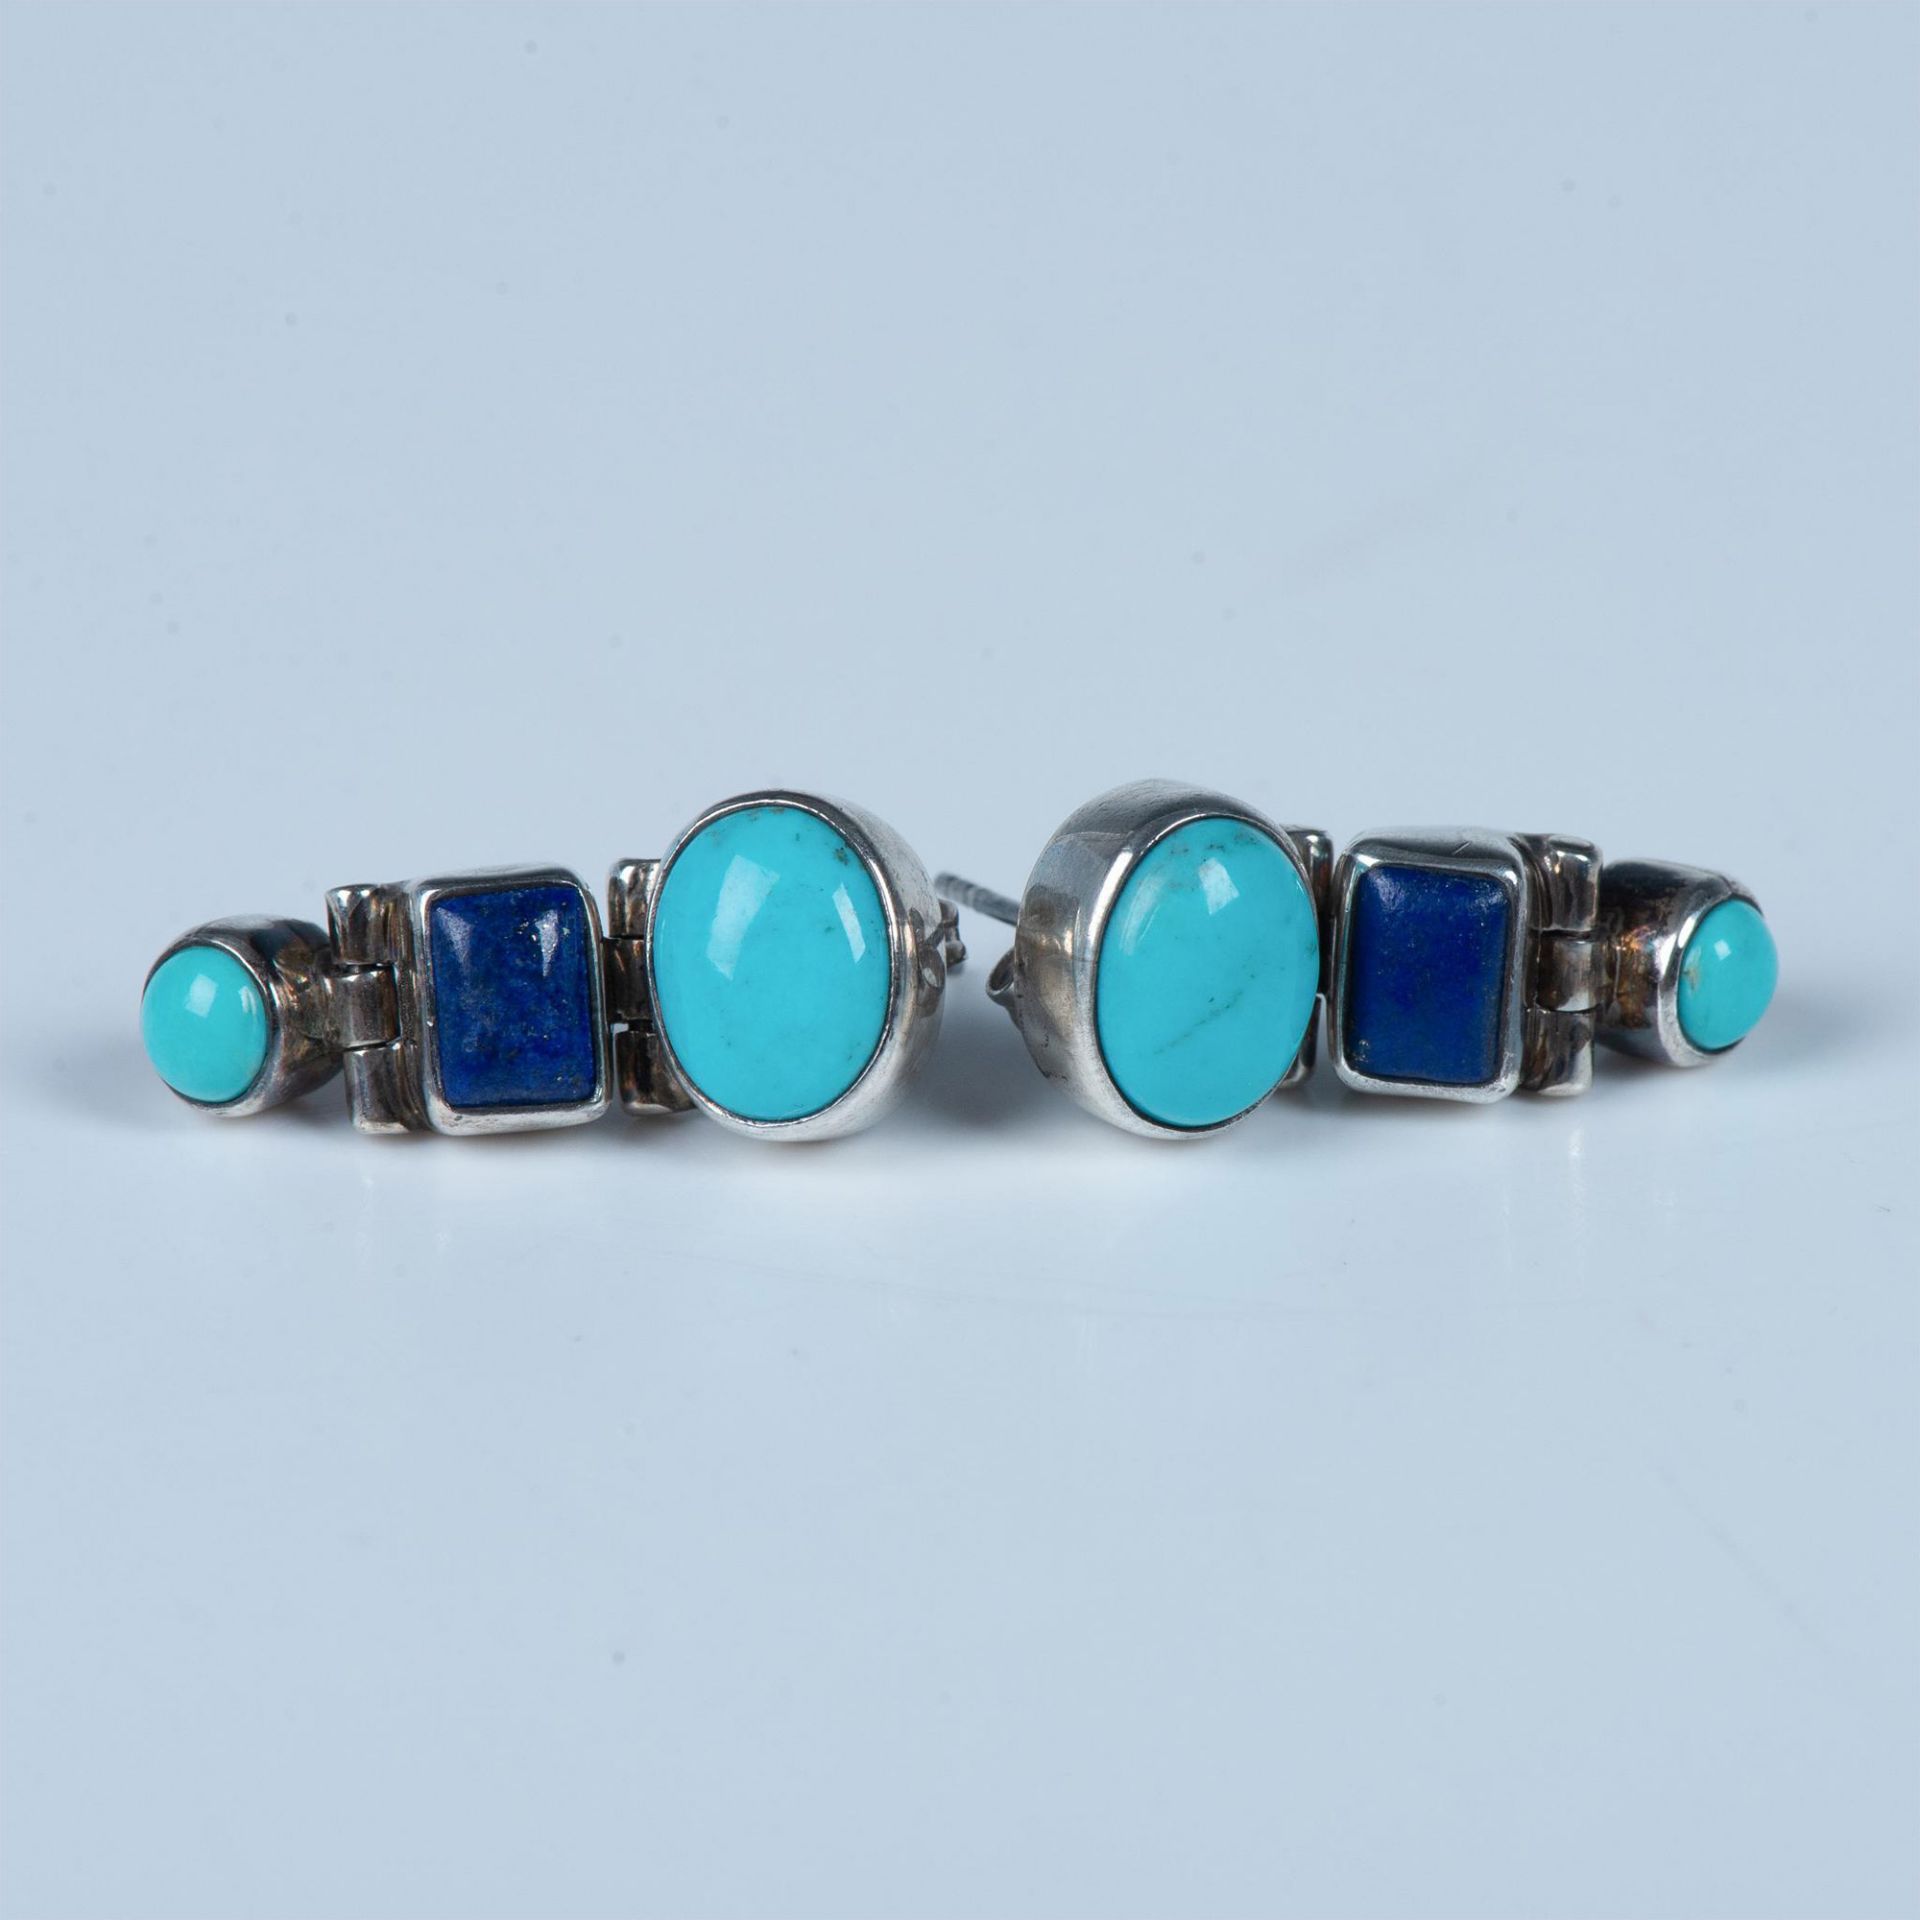 Asch Grossbardt Sterling Silver Turquoise and Lapis Lazuli Earrings - Image 2 of 5